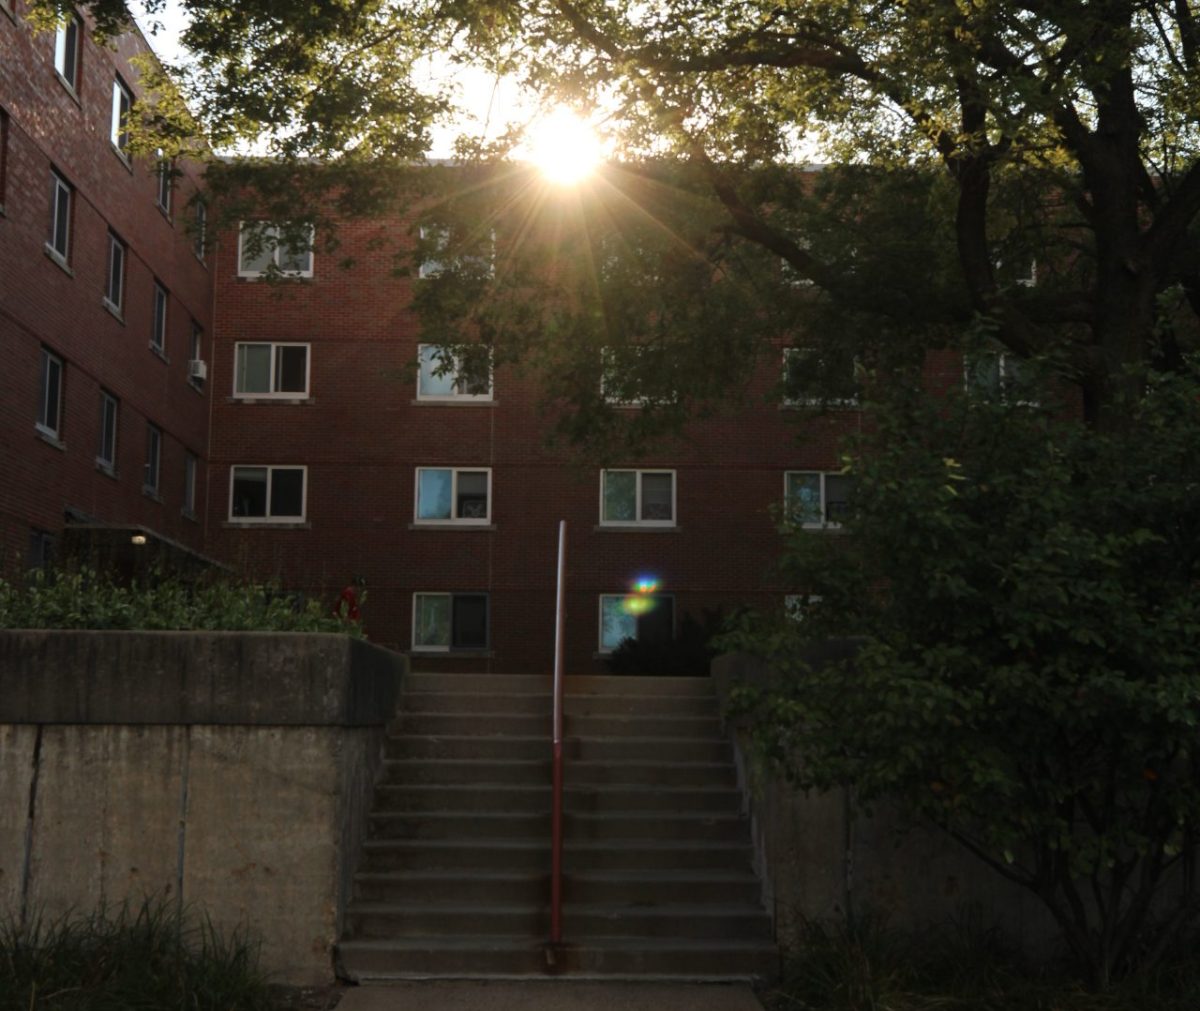 Annie Karr, associate director of marketing for University Housing and Dining, said that there was a near record number of returning students renewing contracted for fall 2024. The occupancy for fall 2024 is anticipated to be as high as it was in 2018.